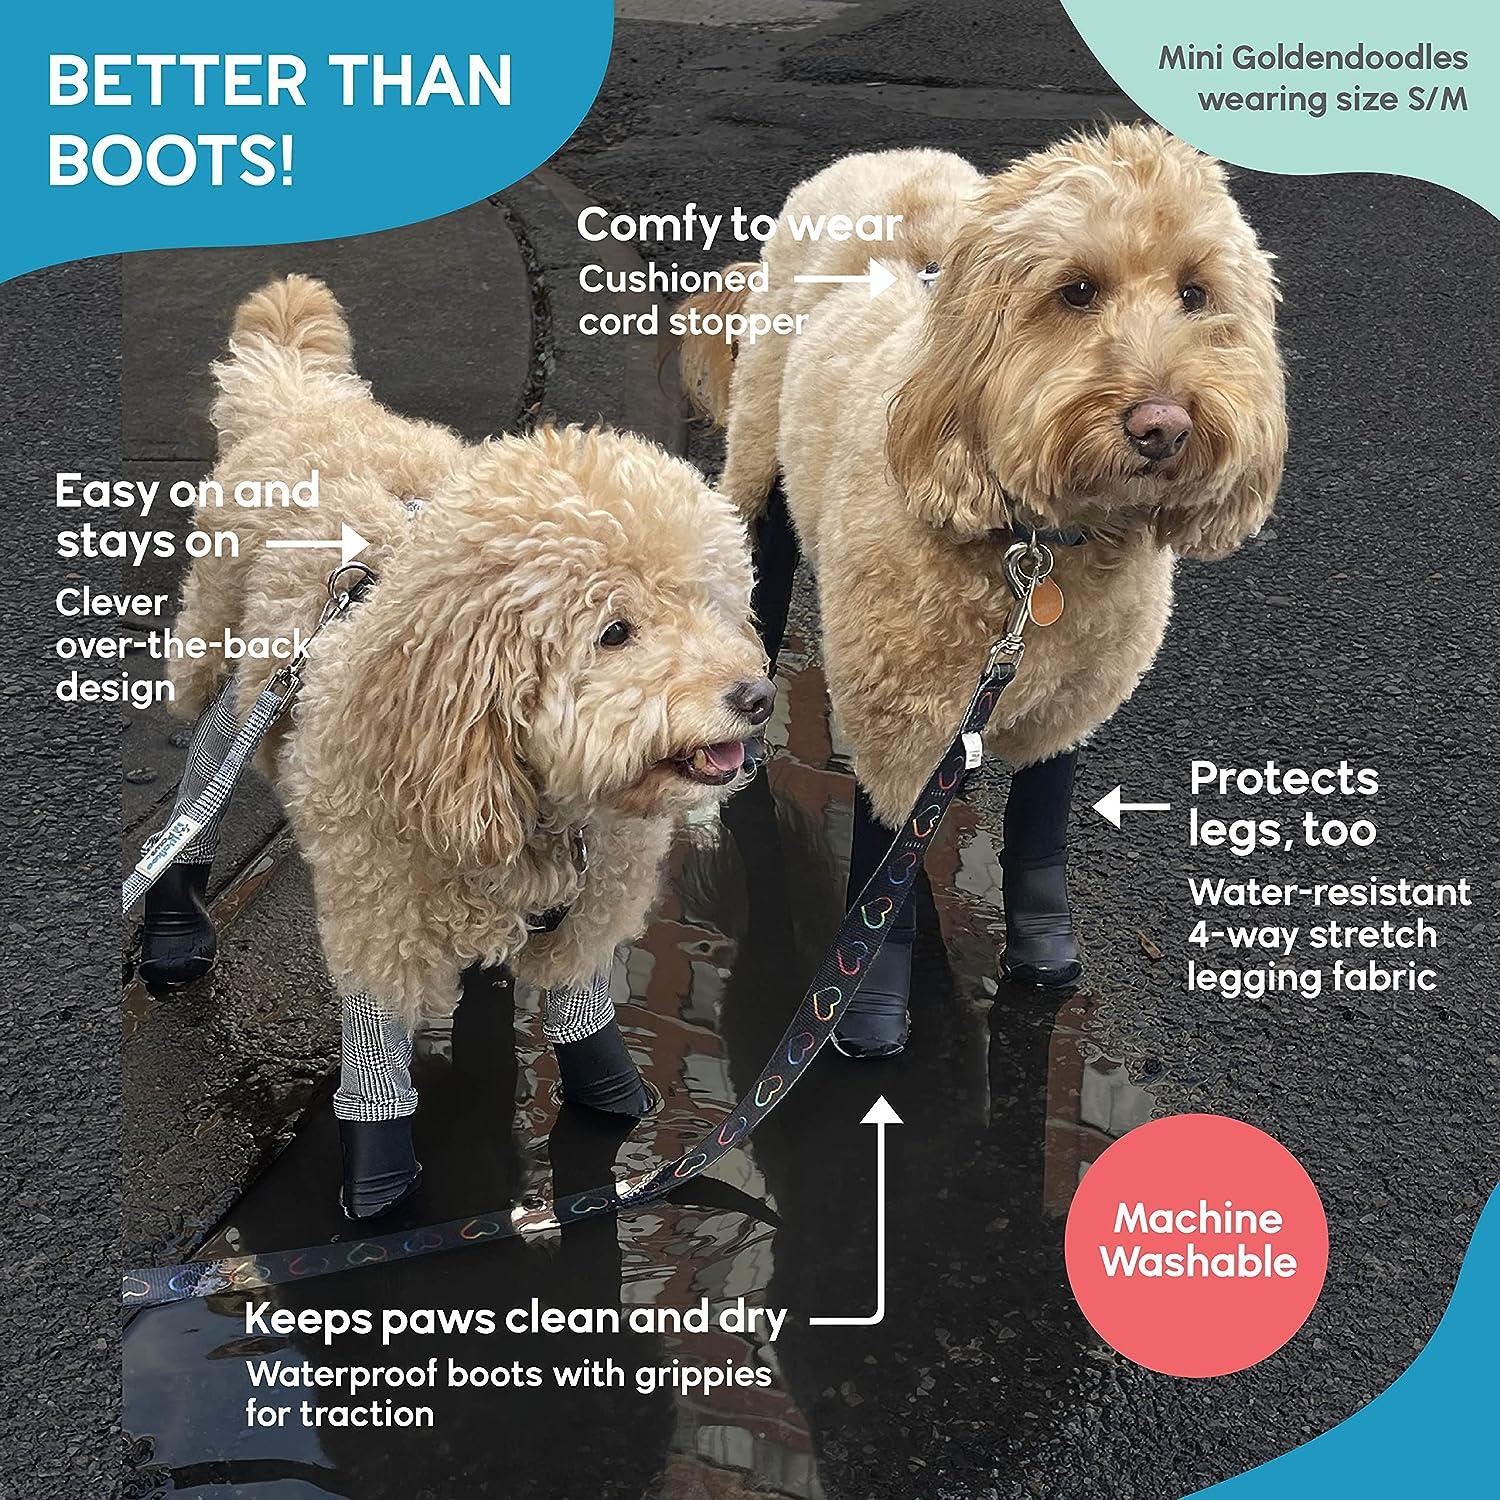 Winter Dog Boots | Dog Snow Boots | Dog Boot Leggings | Rain Boots for Dogs  Waterproof with Rugged Rubber Sole | Anti-Fall Dog Outdoor Walking Running  Hiking Booties with Auxiliary Strap :